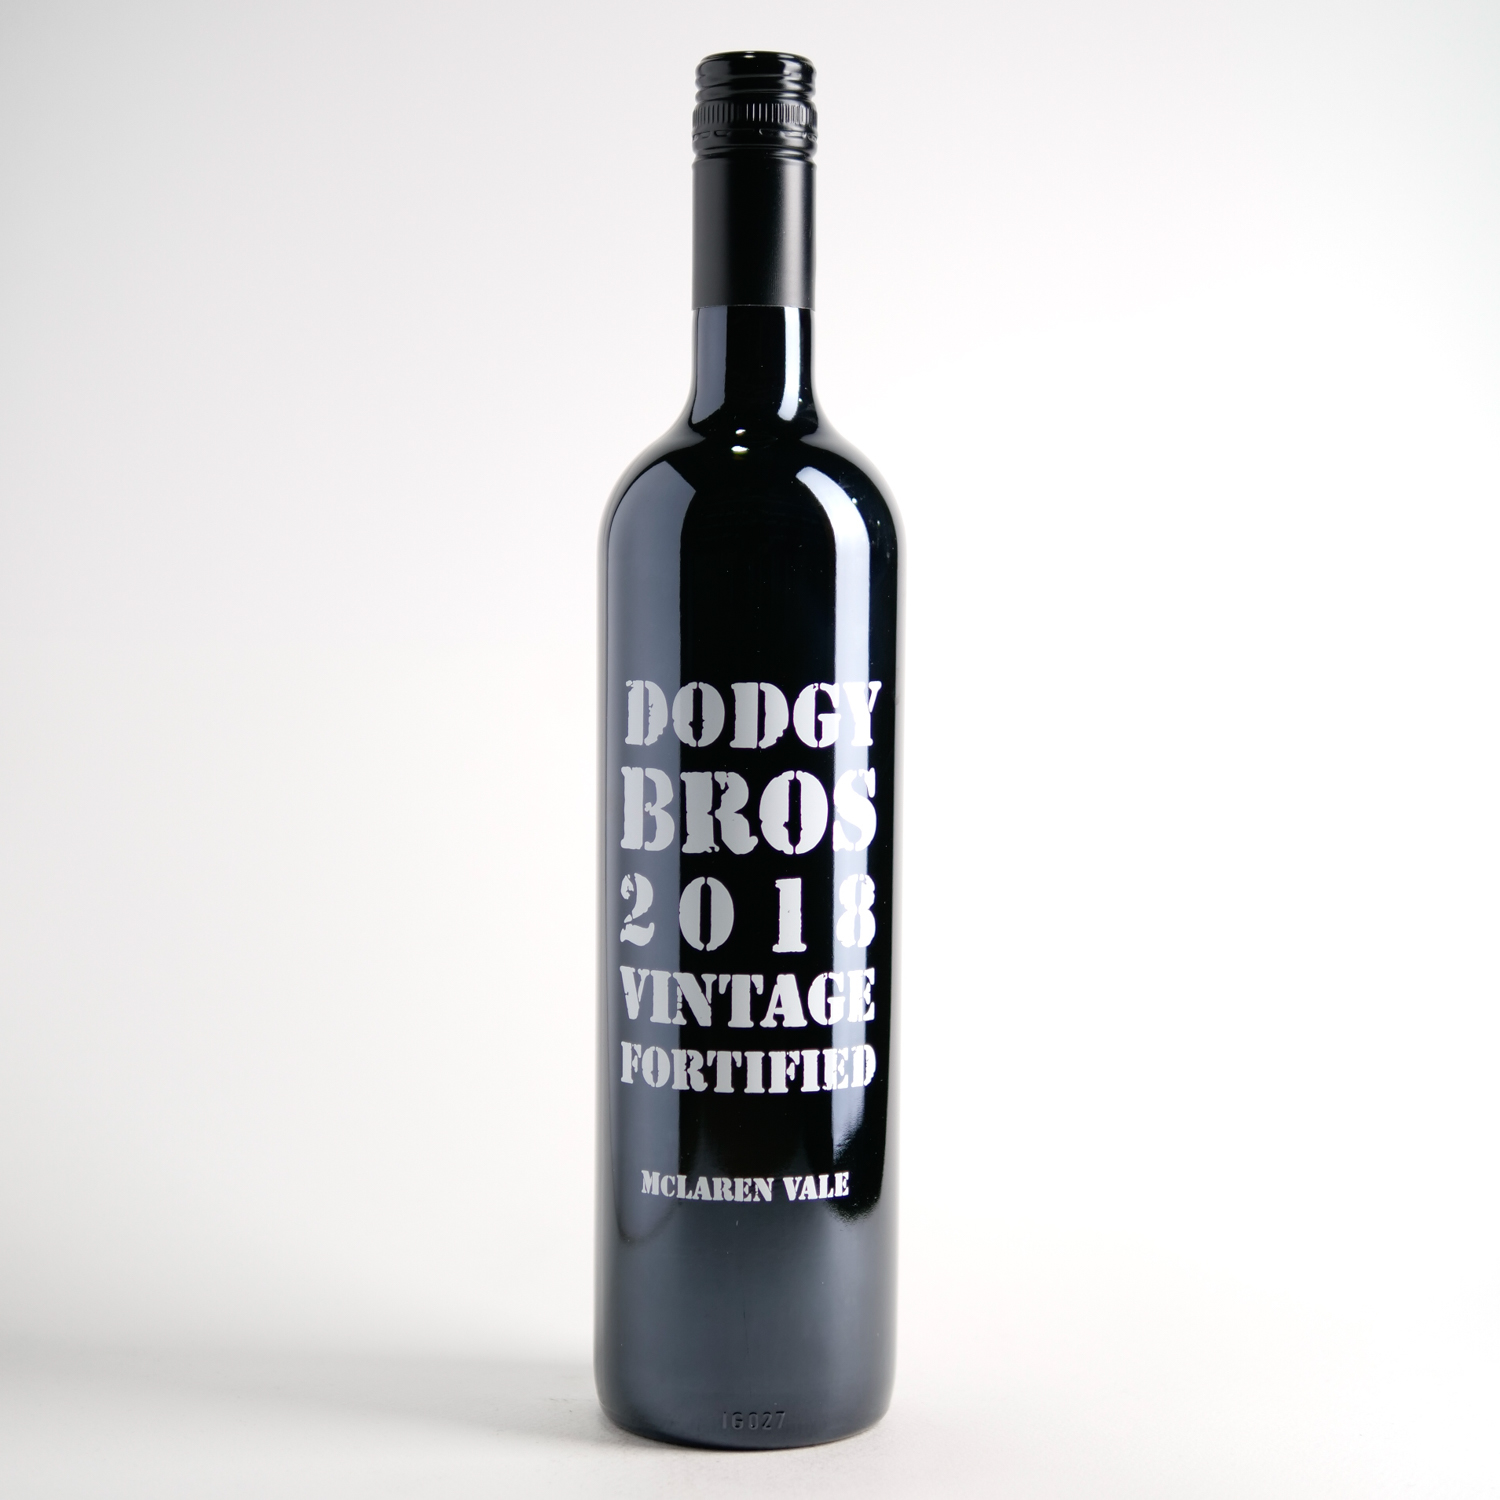 Dodgy Bros Vintage Fortified 2018